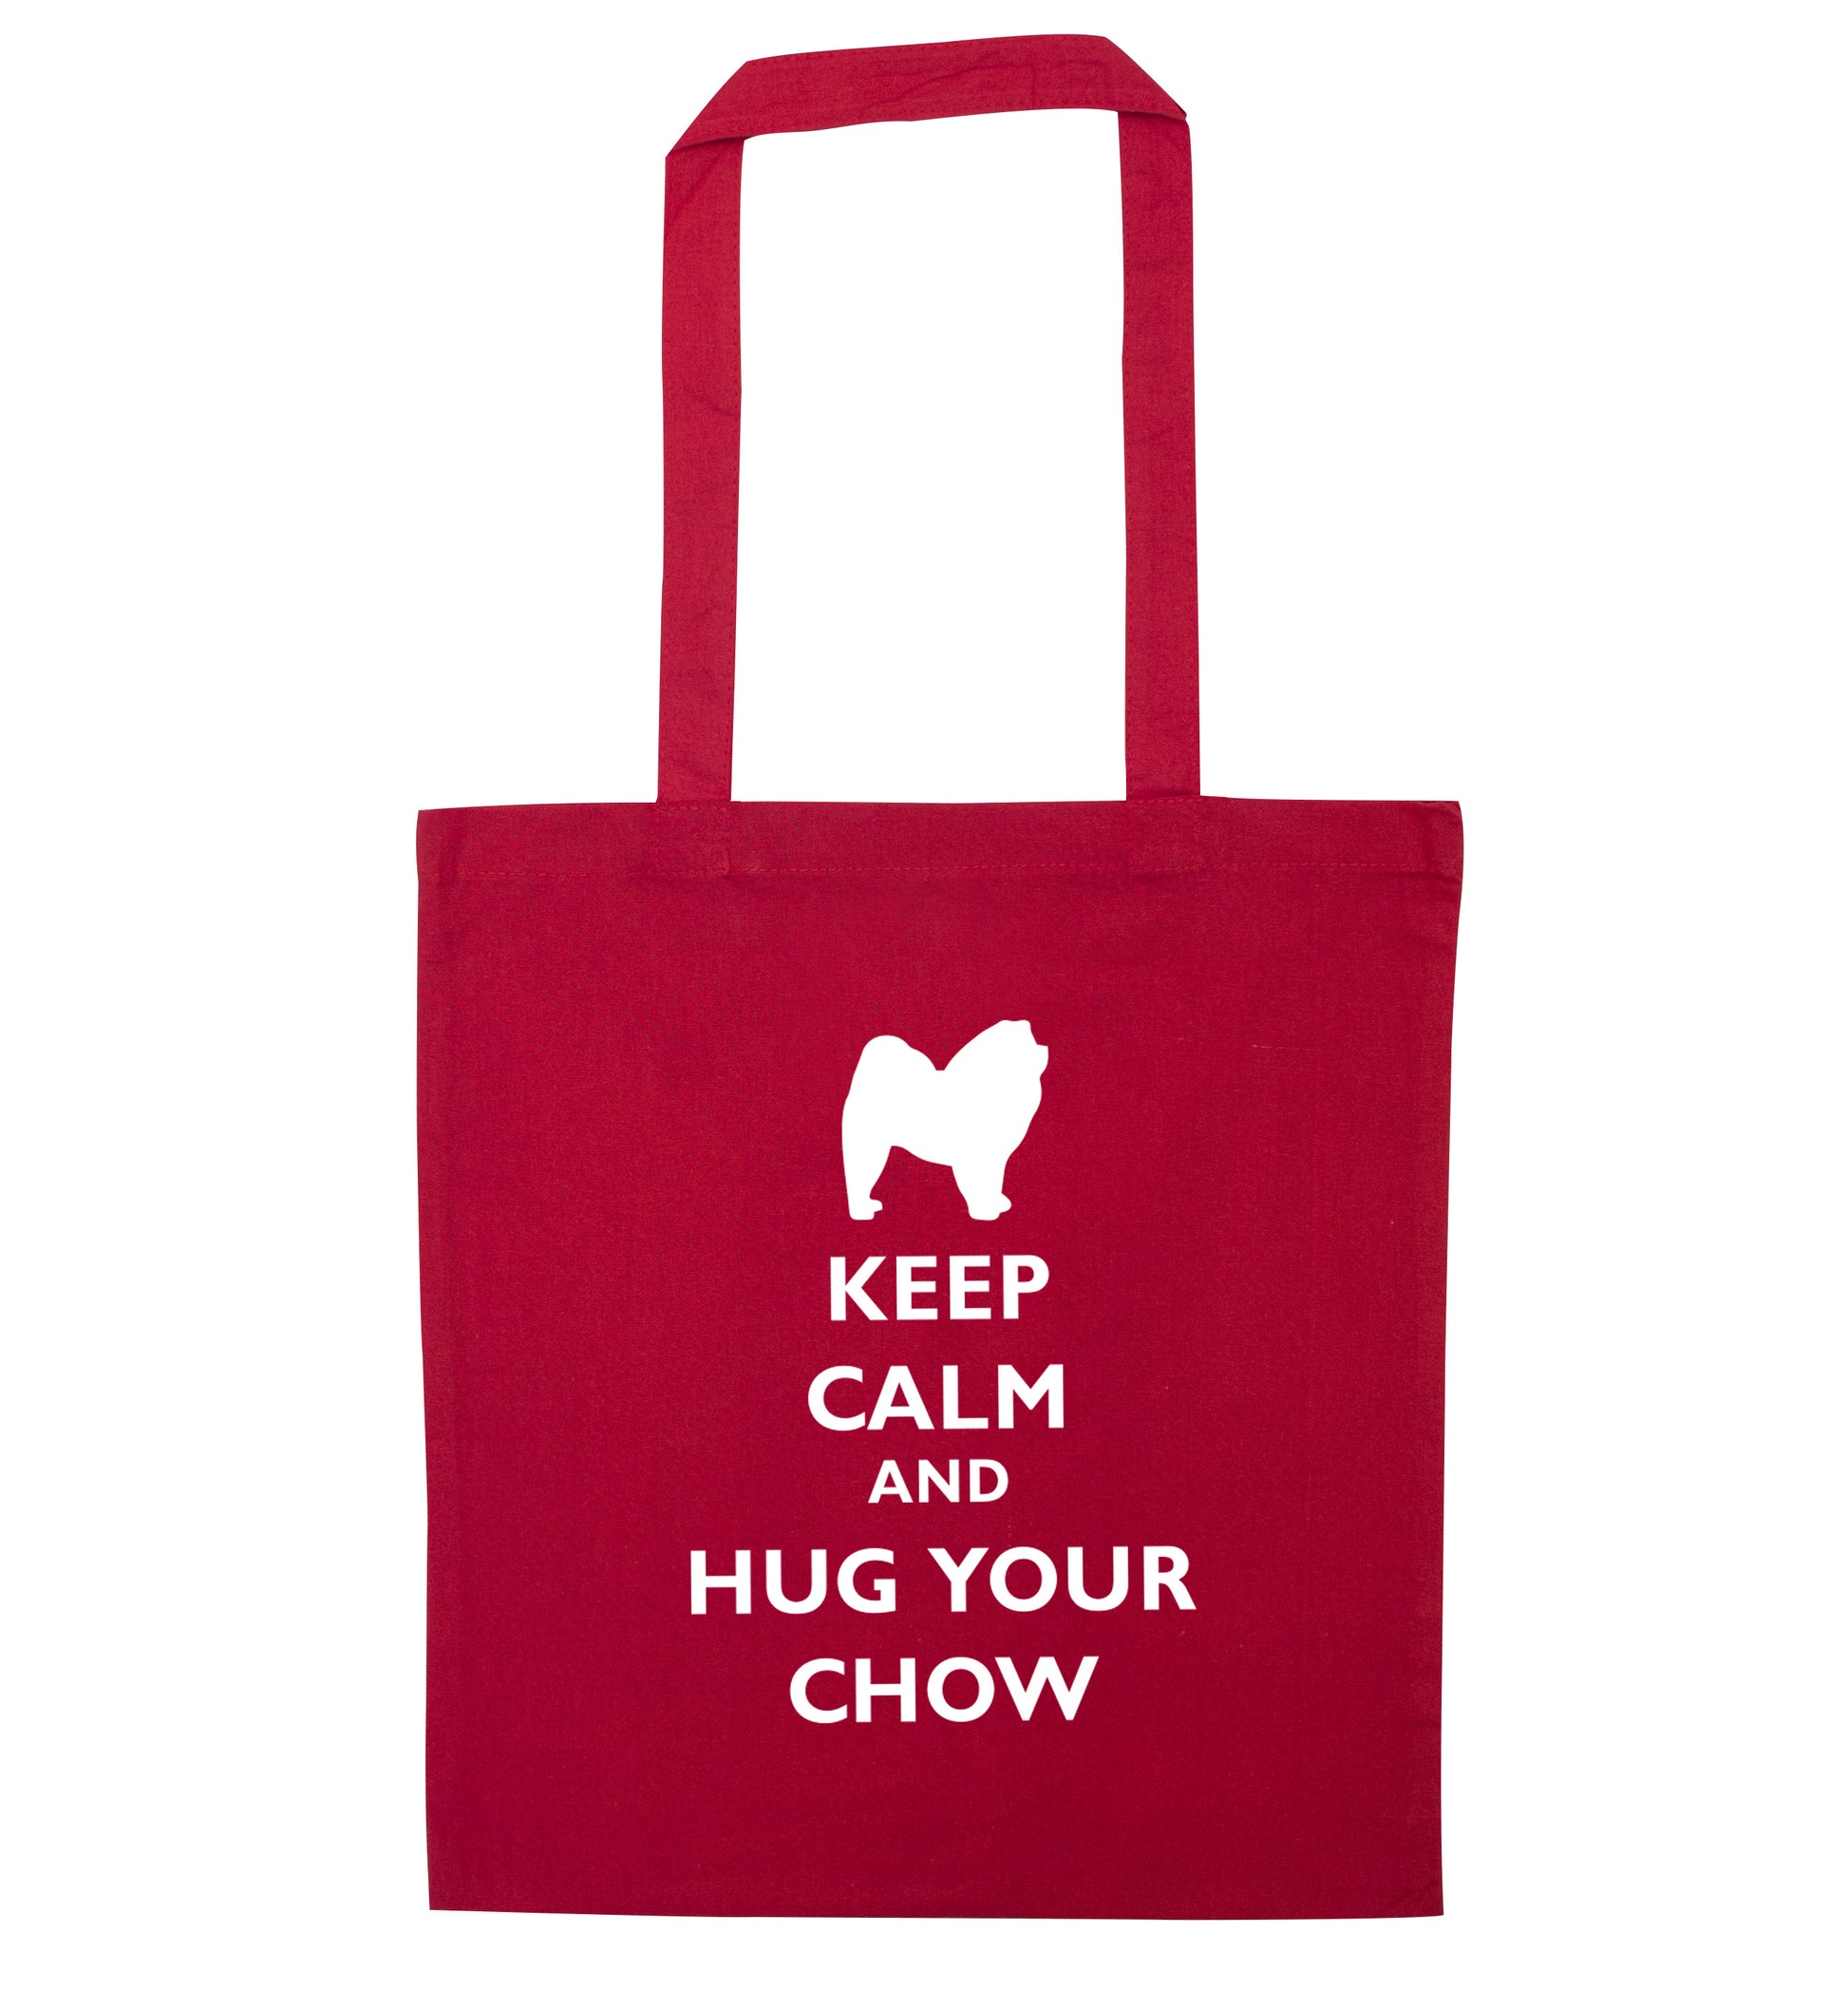 Keep calm and hug your chow red tote bag